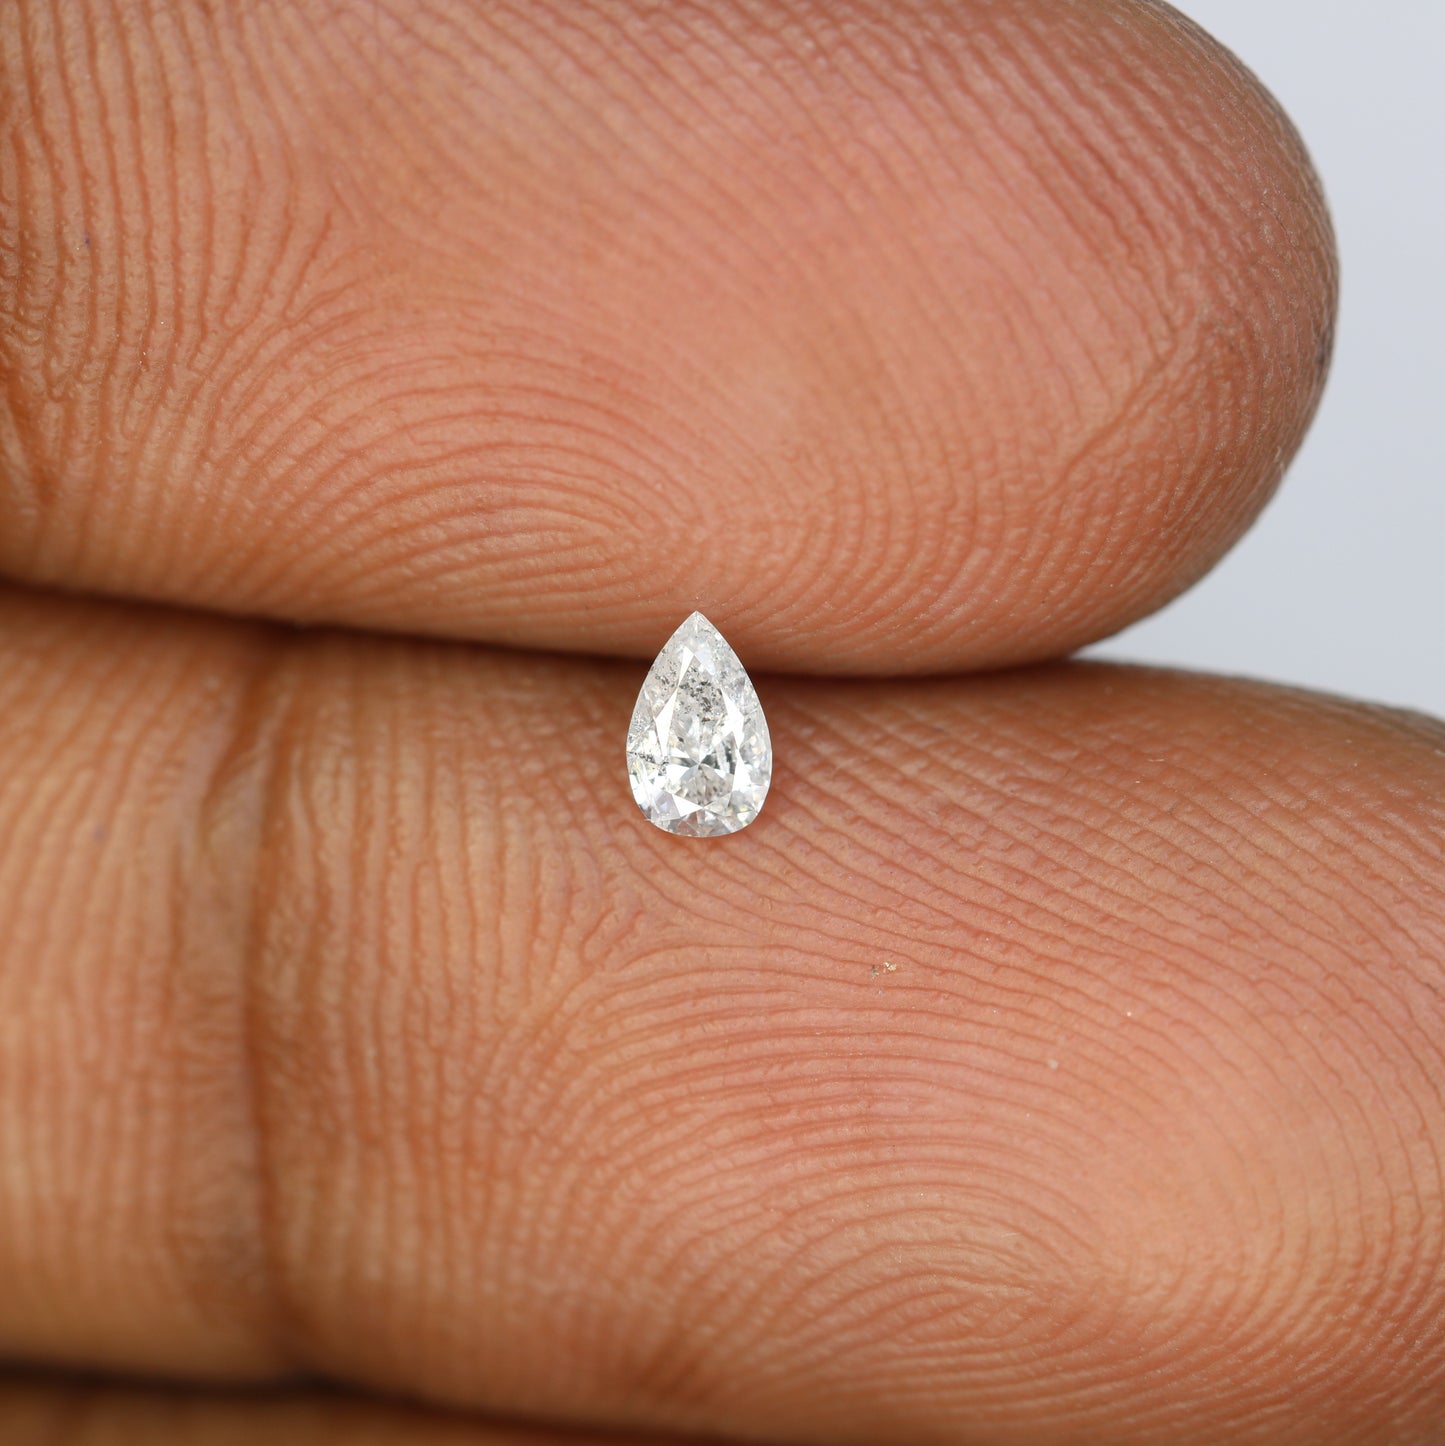 0.15 CT Salt And Pepper Loose Pear Shape Diamond For Engagement Ring